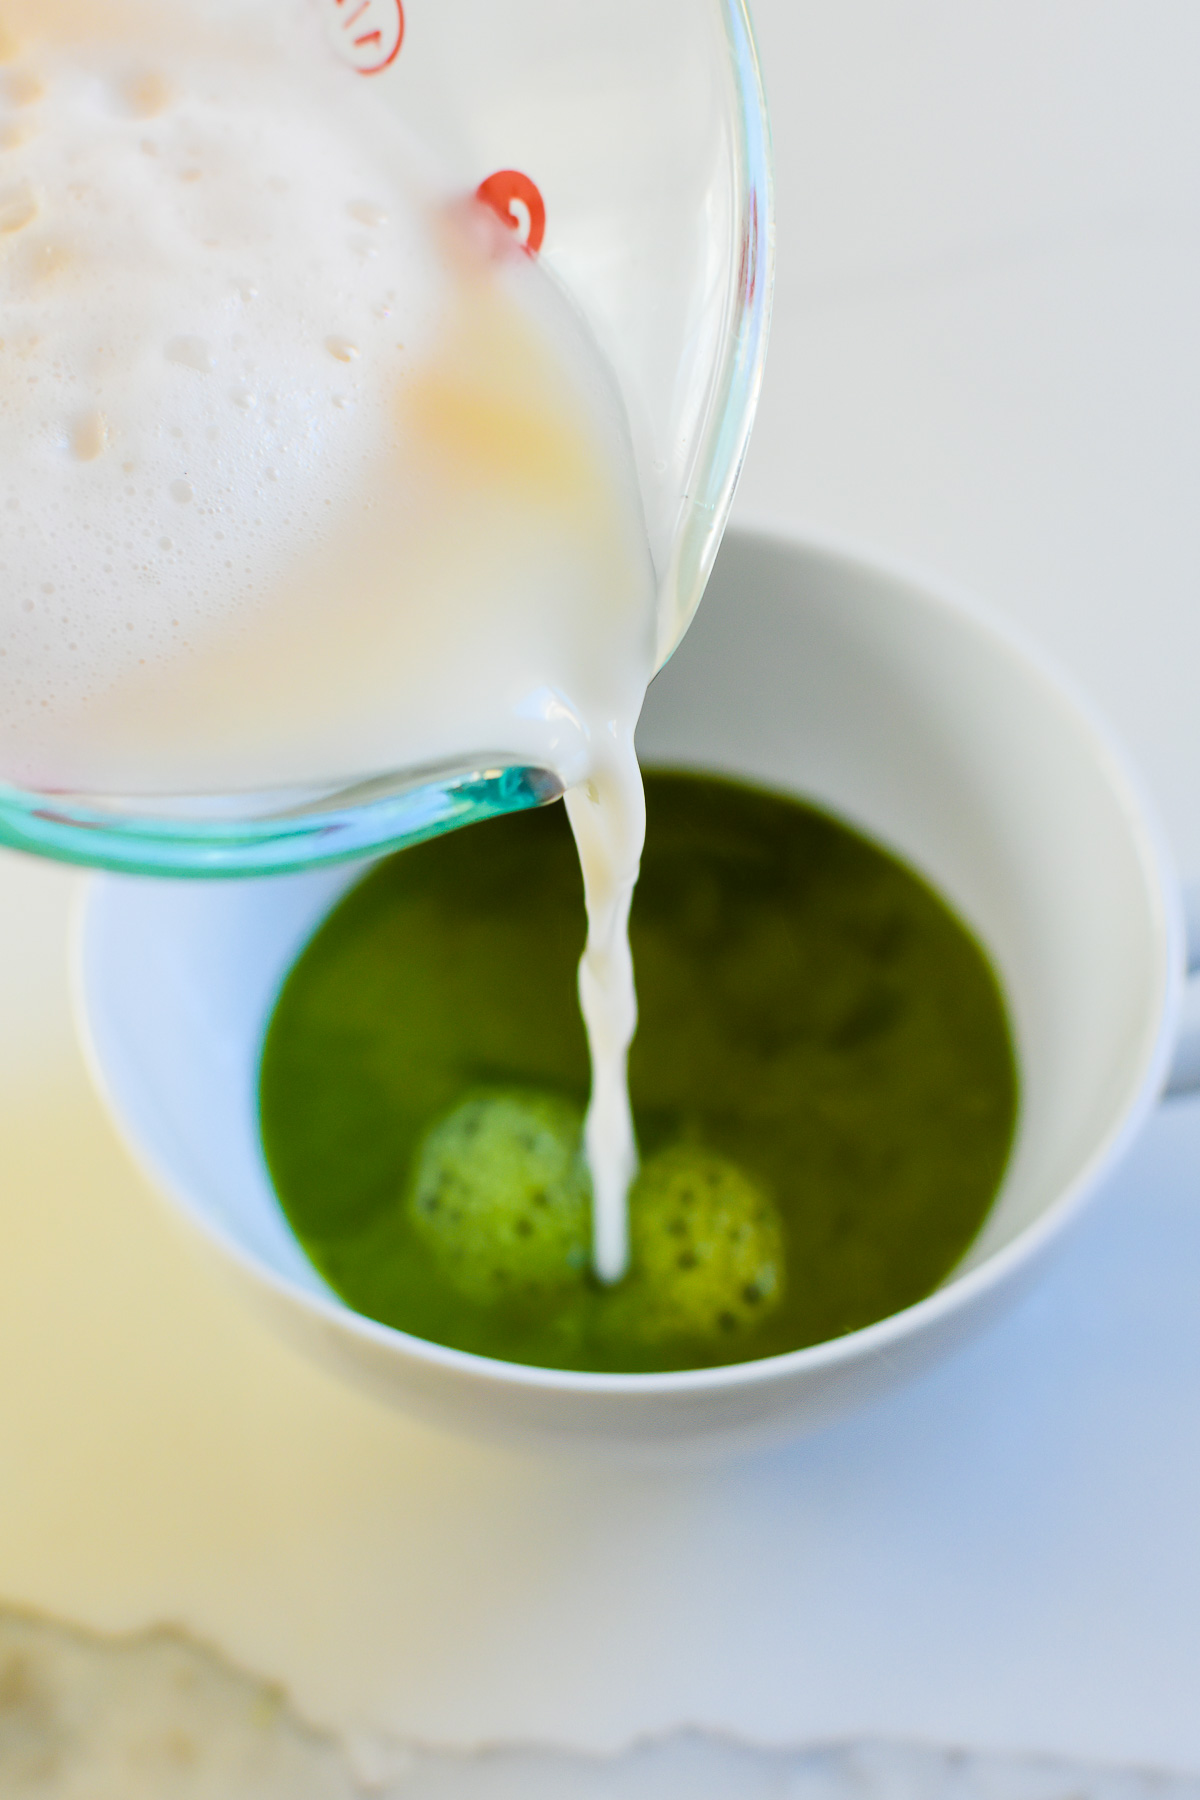 pouring foamy steamed milk into tea cup of bright green matcha green tea.